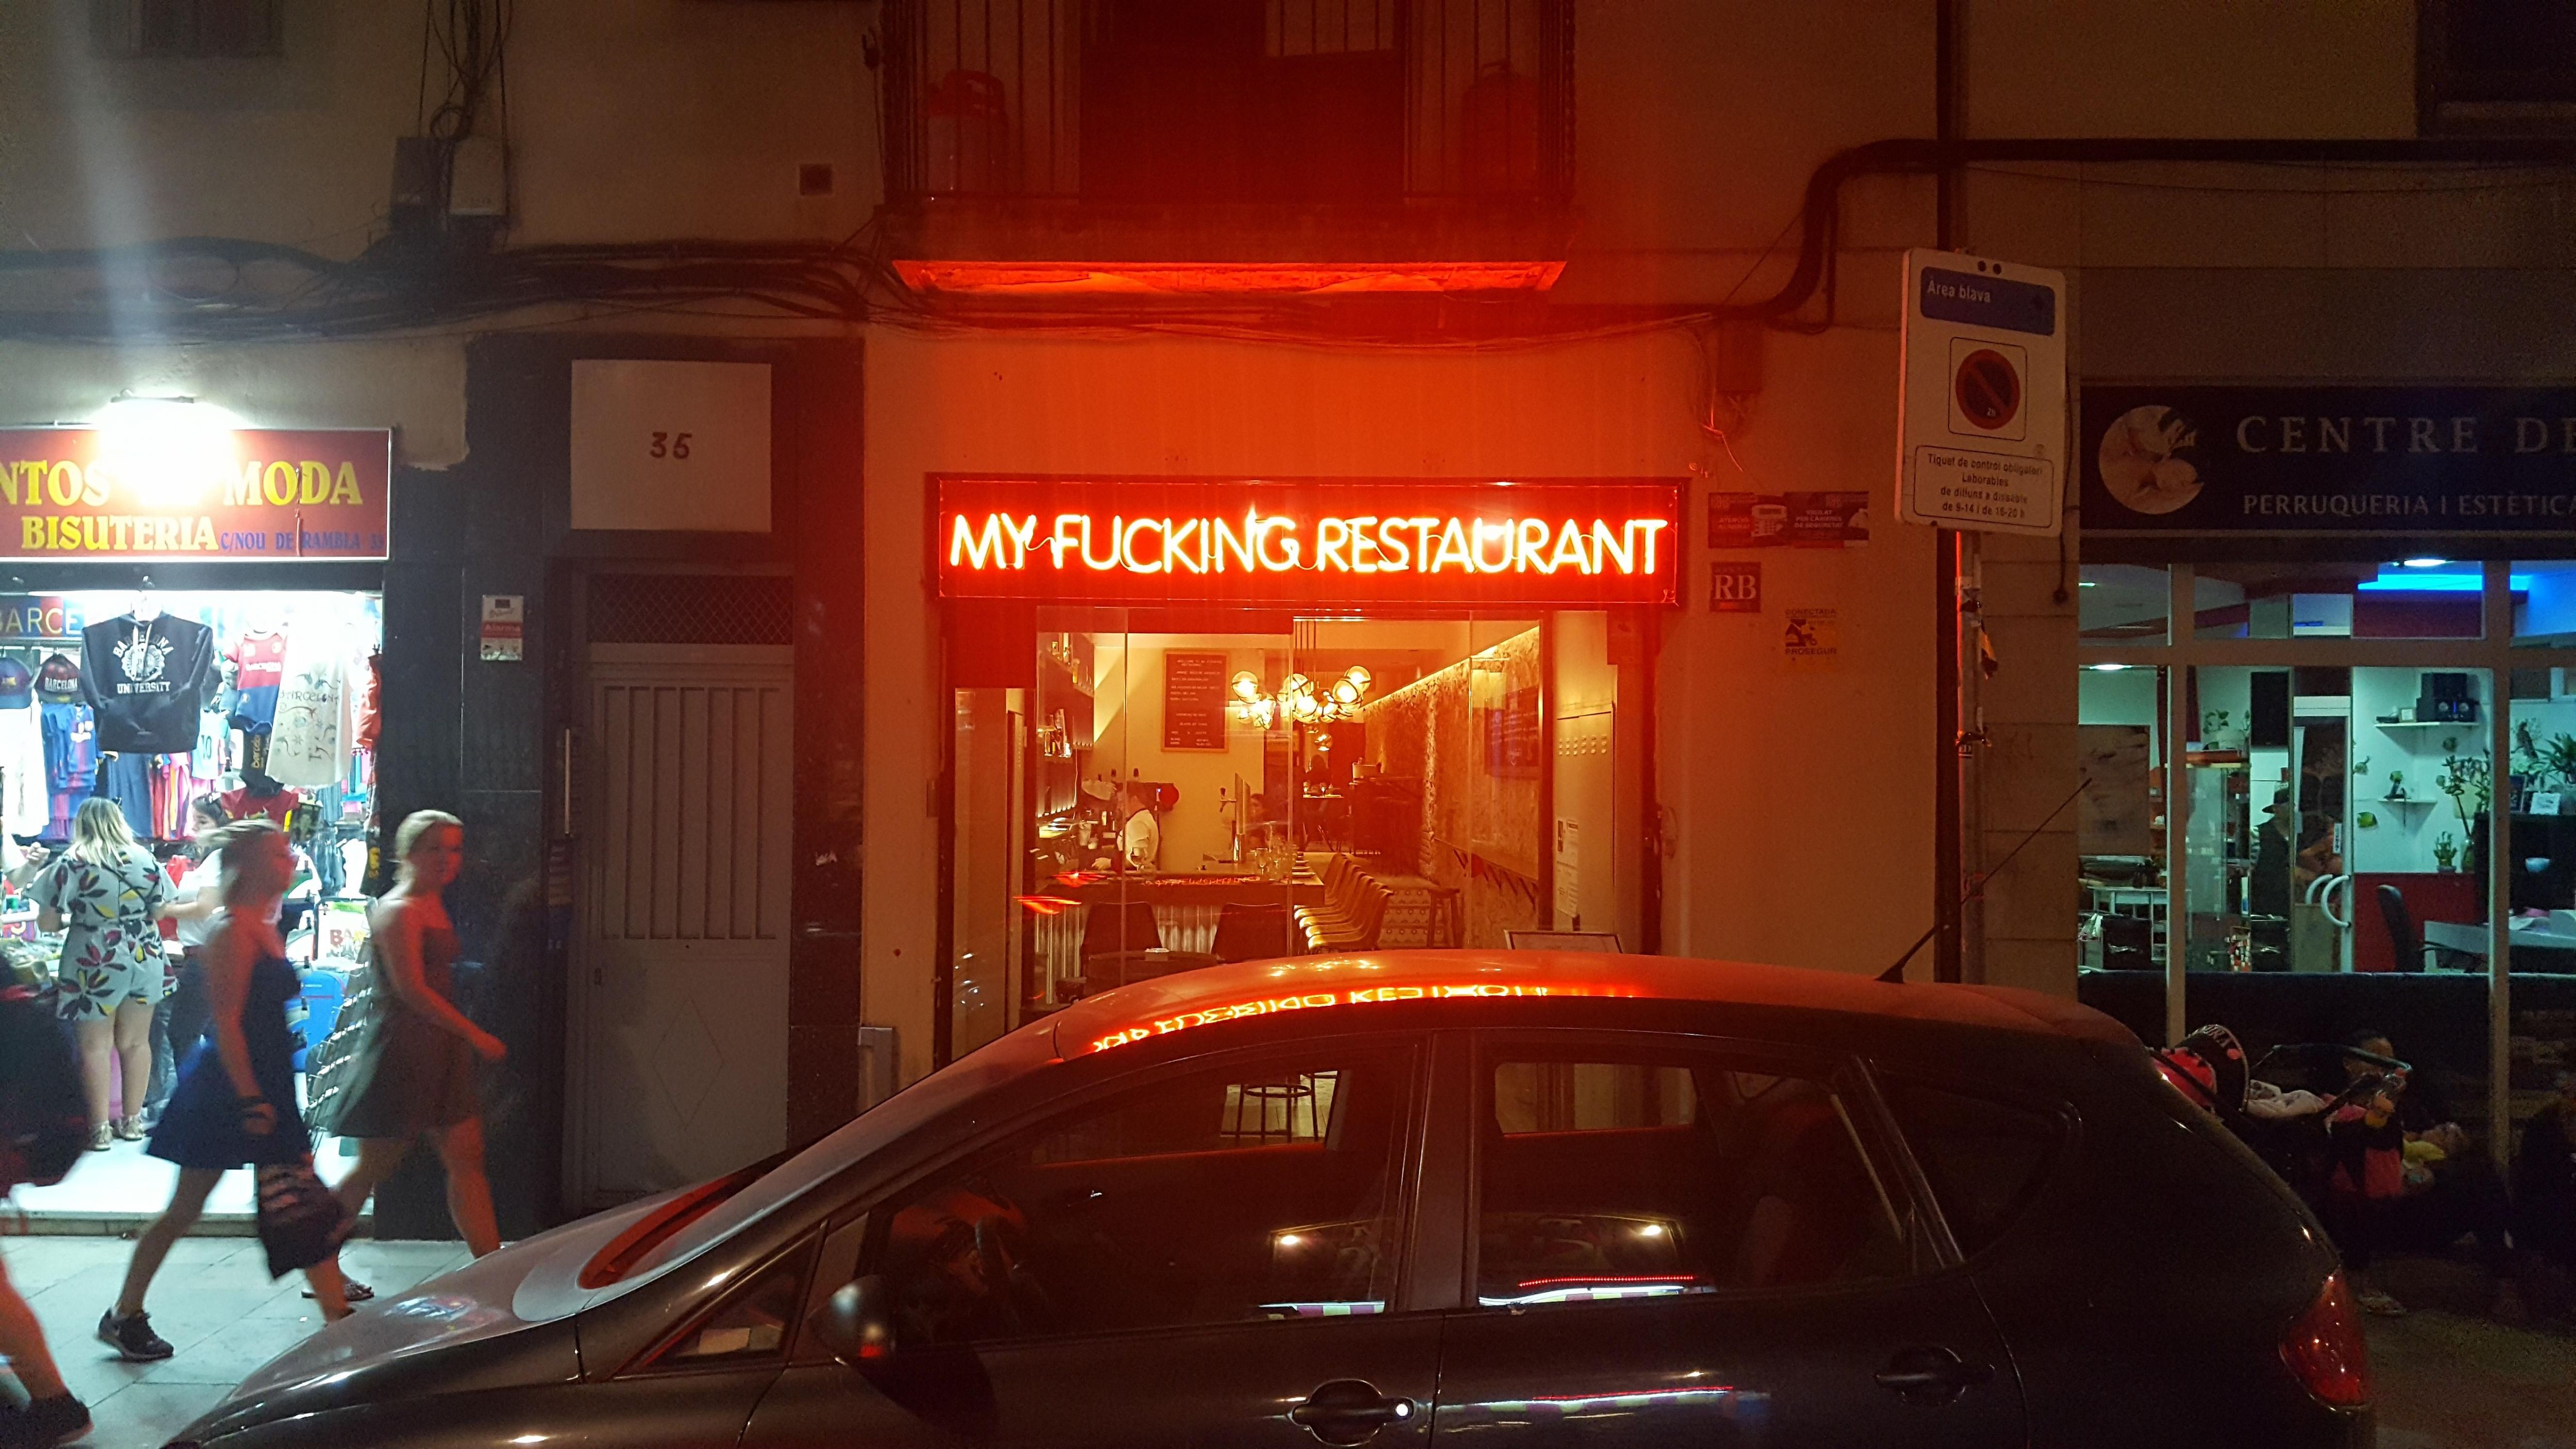 Whose ***ing restaurant is this?